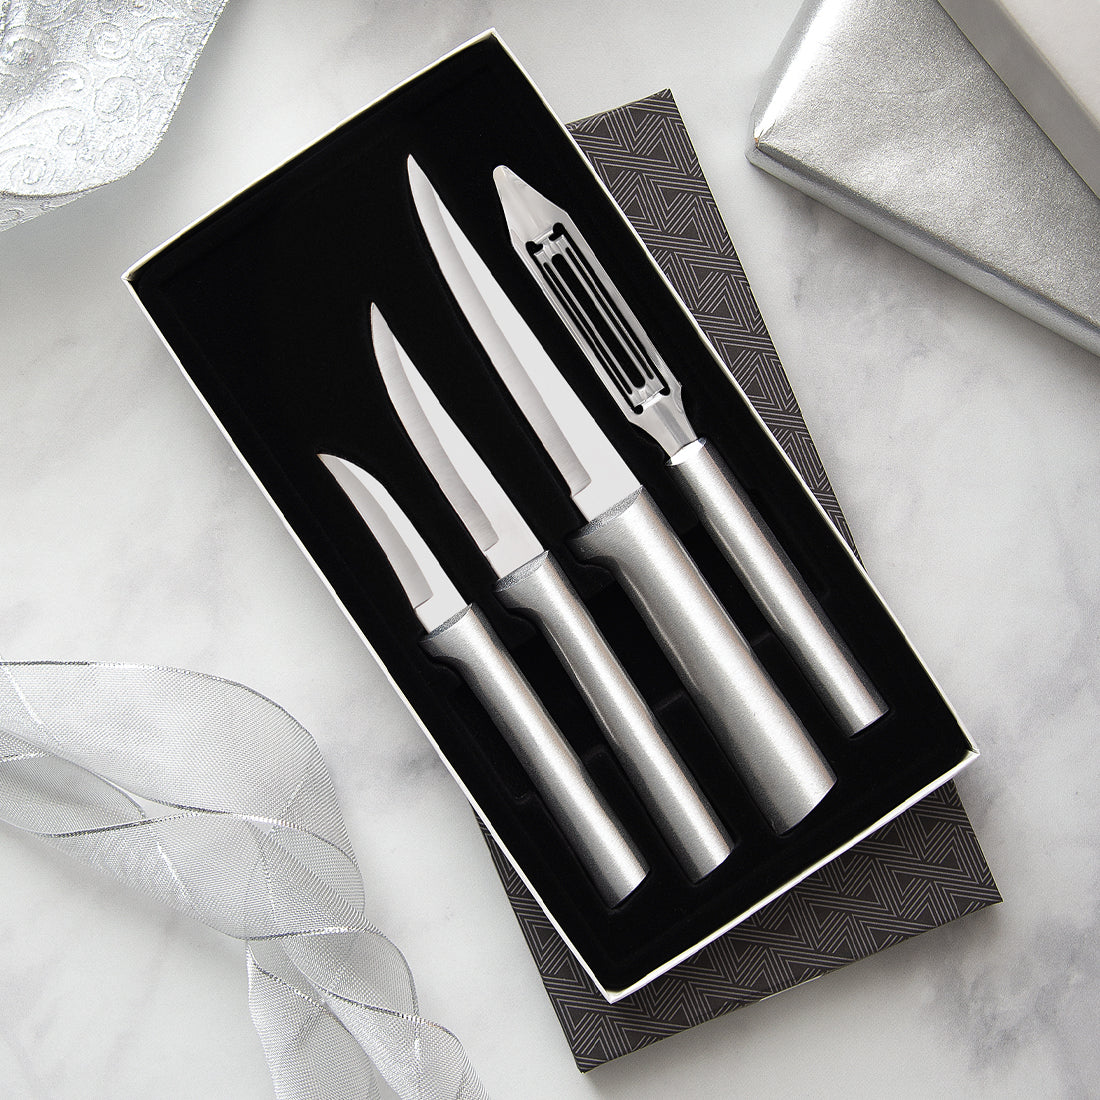  Rada Cutlery 15 Pc Gift Set Ultimate Collection, Piece